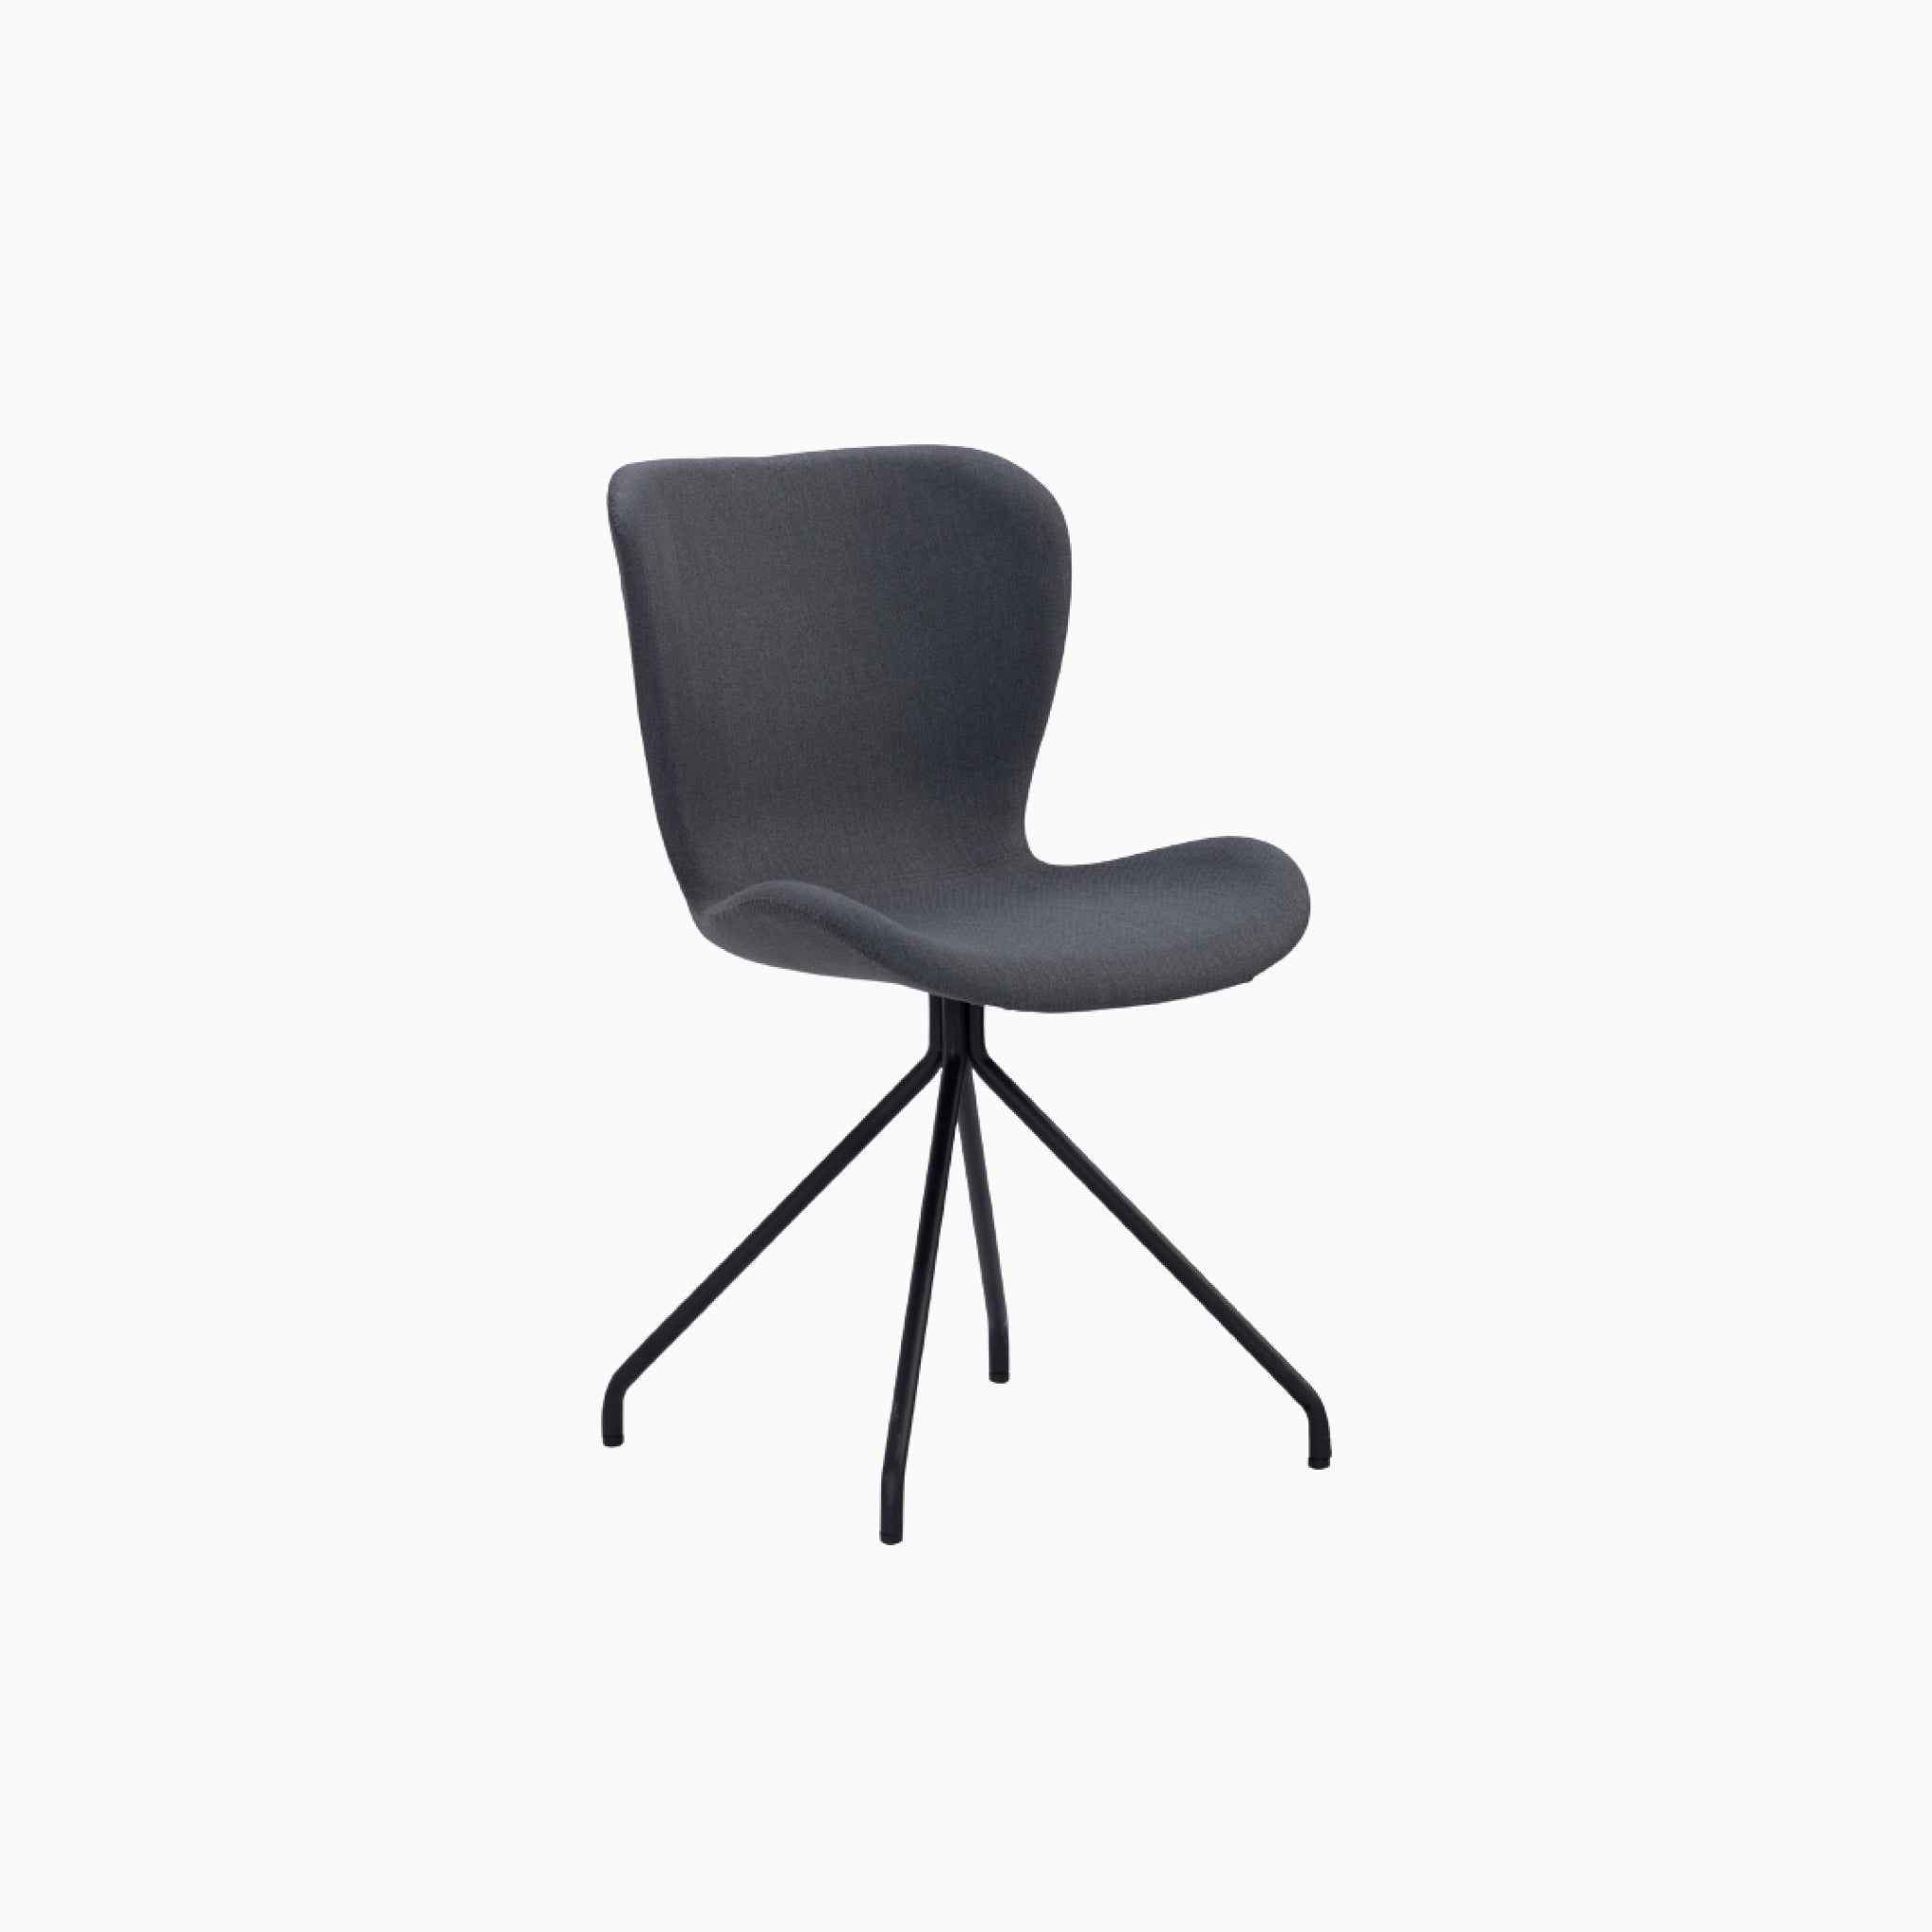 Lumo Sand Dining Chair with Black Leg